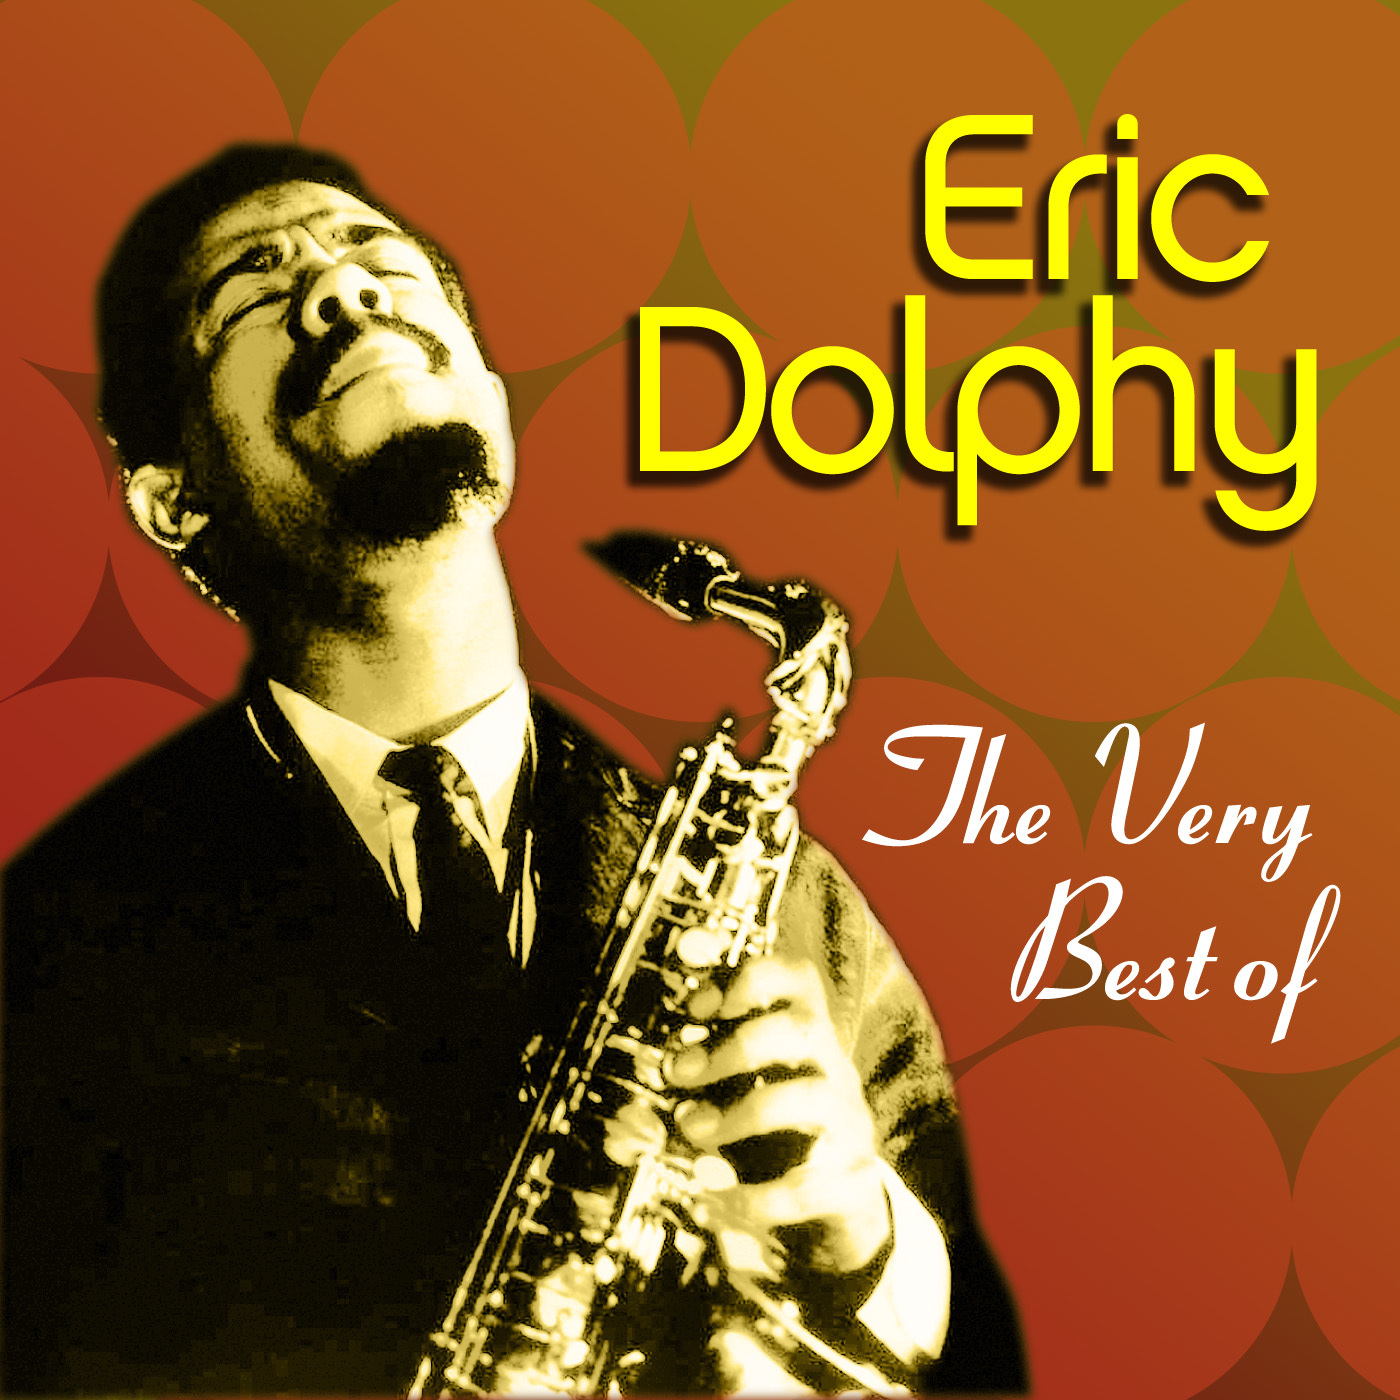 The Very Best of Eric Dolphy